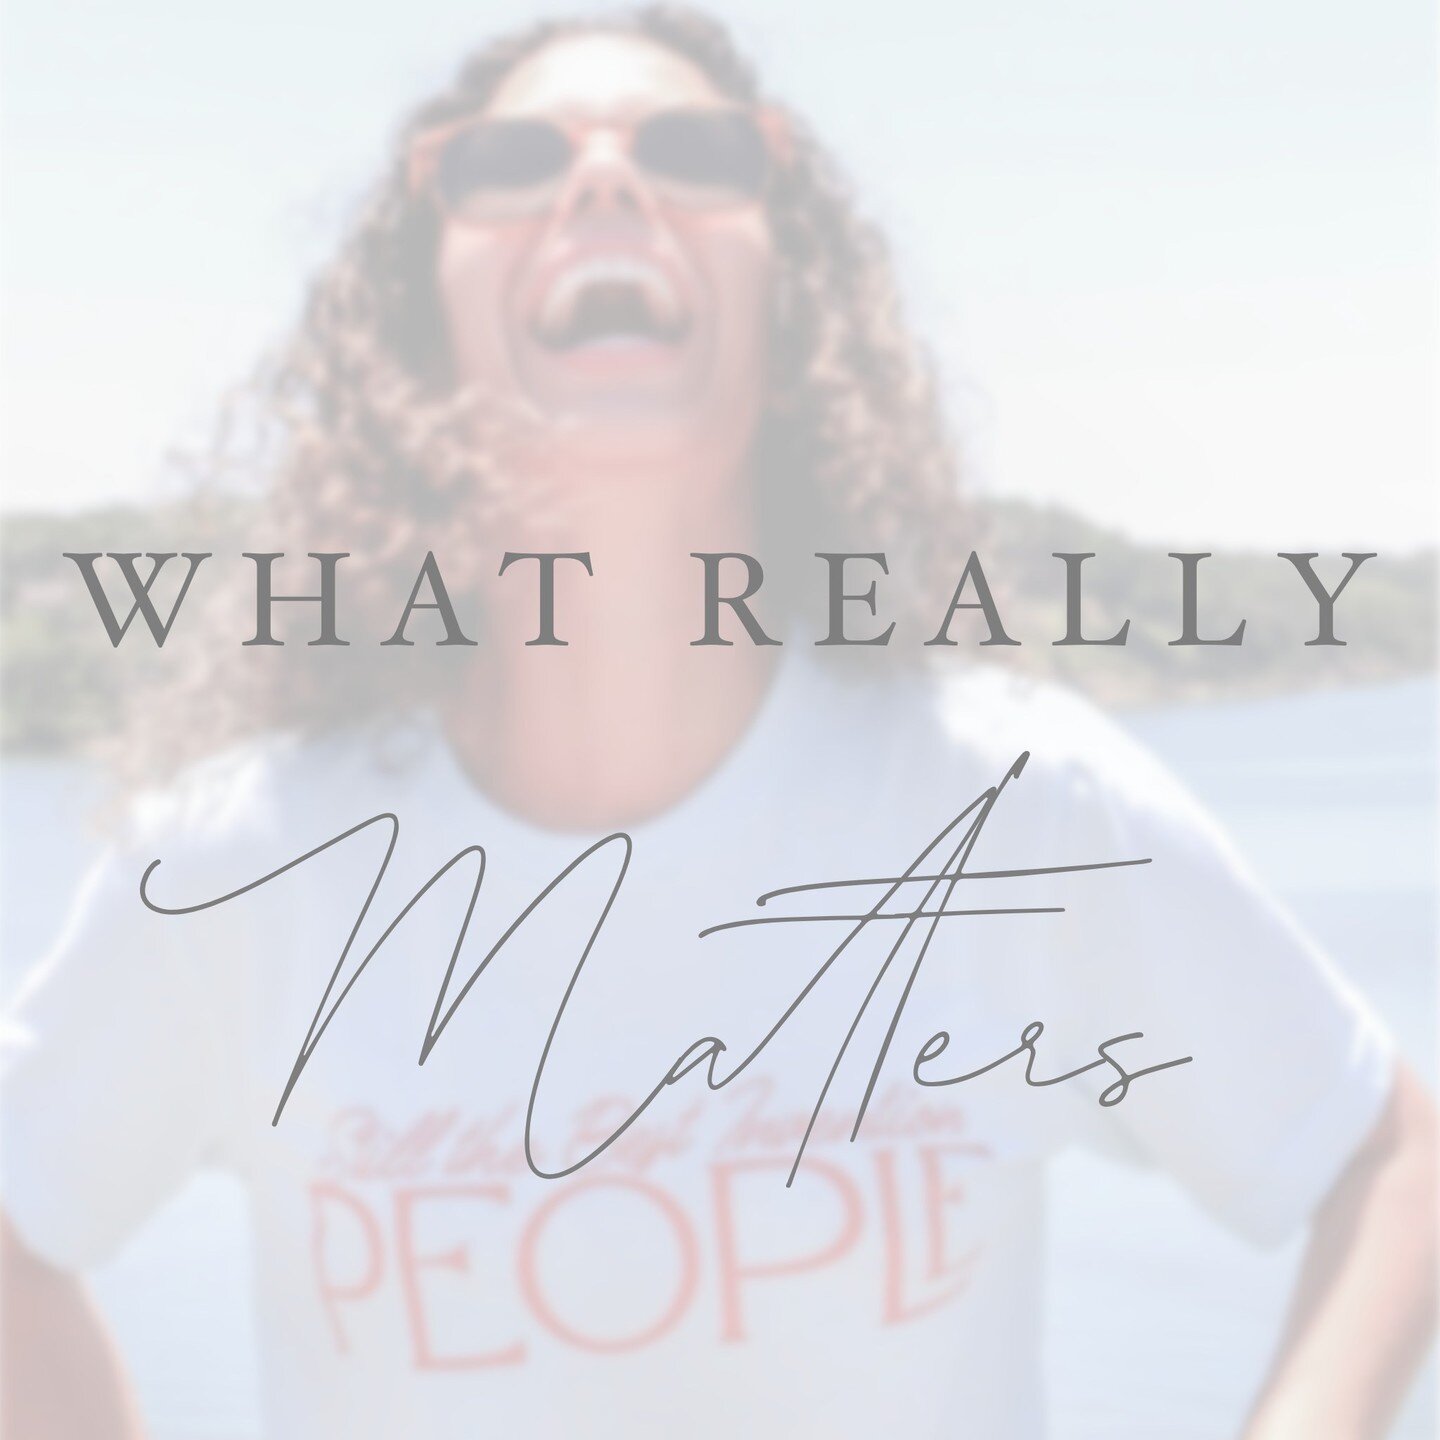 What Really Matters - On Friendship &amp; Loneliness 12 Months of Digital Wellness #linkinbio